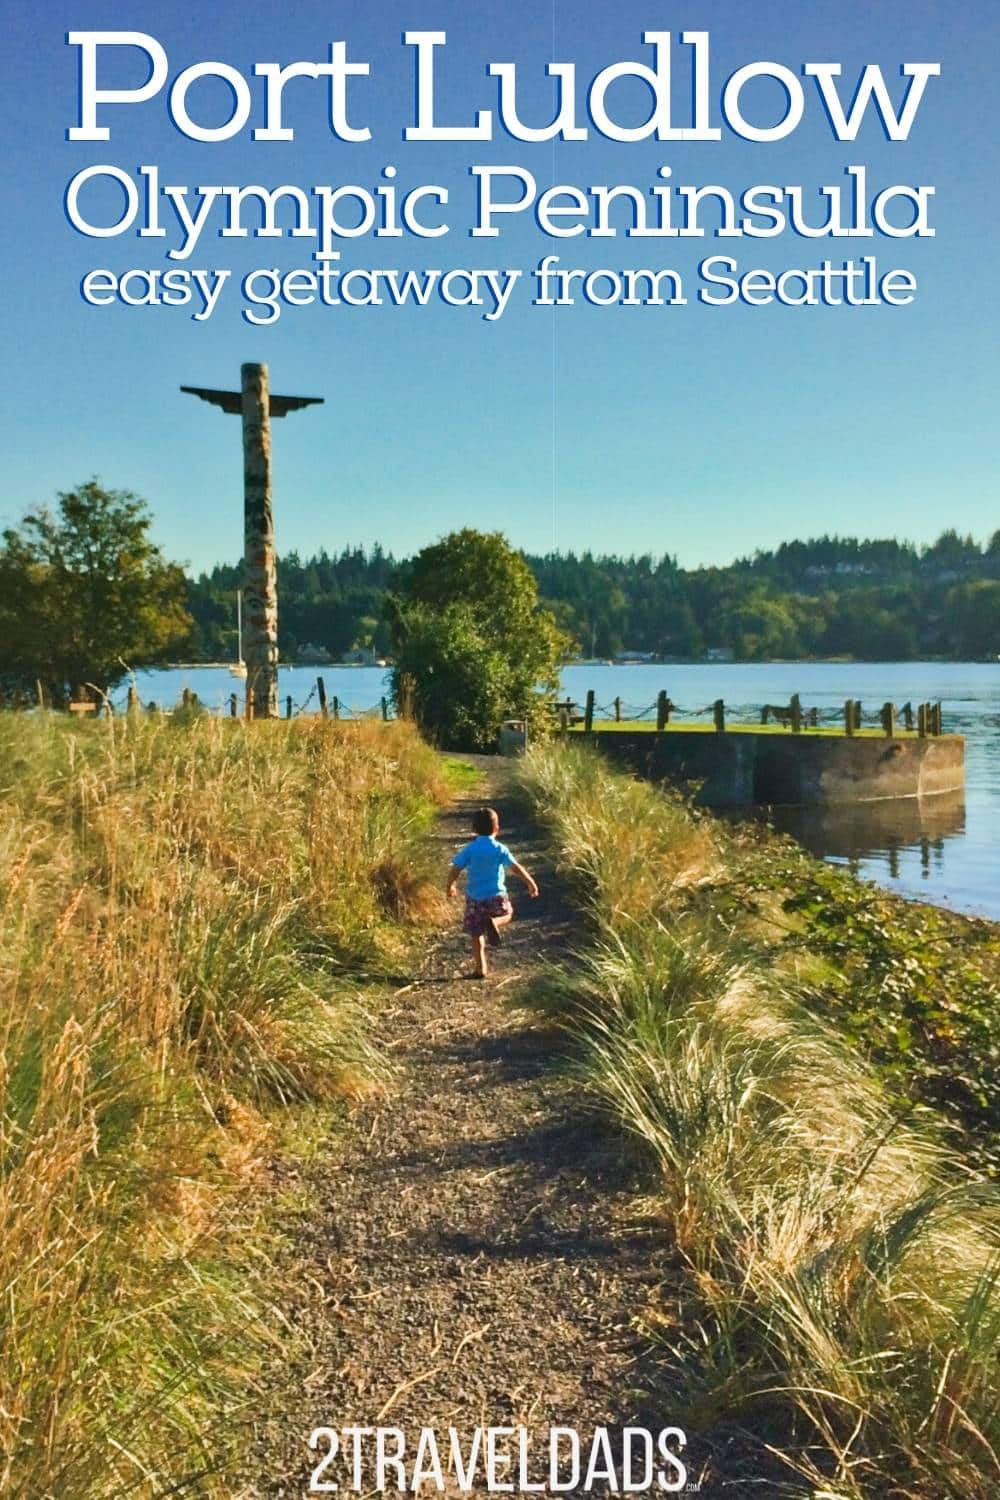 Port Ludlow on the Olympic Peninsula is a great, easy weekend getaway from Seattle or Tacoma. Make it a road trip stop or spend a few nights relaxing, eating amazing food and exploring the outdoors.